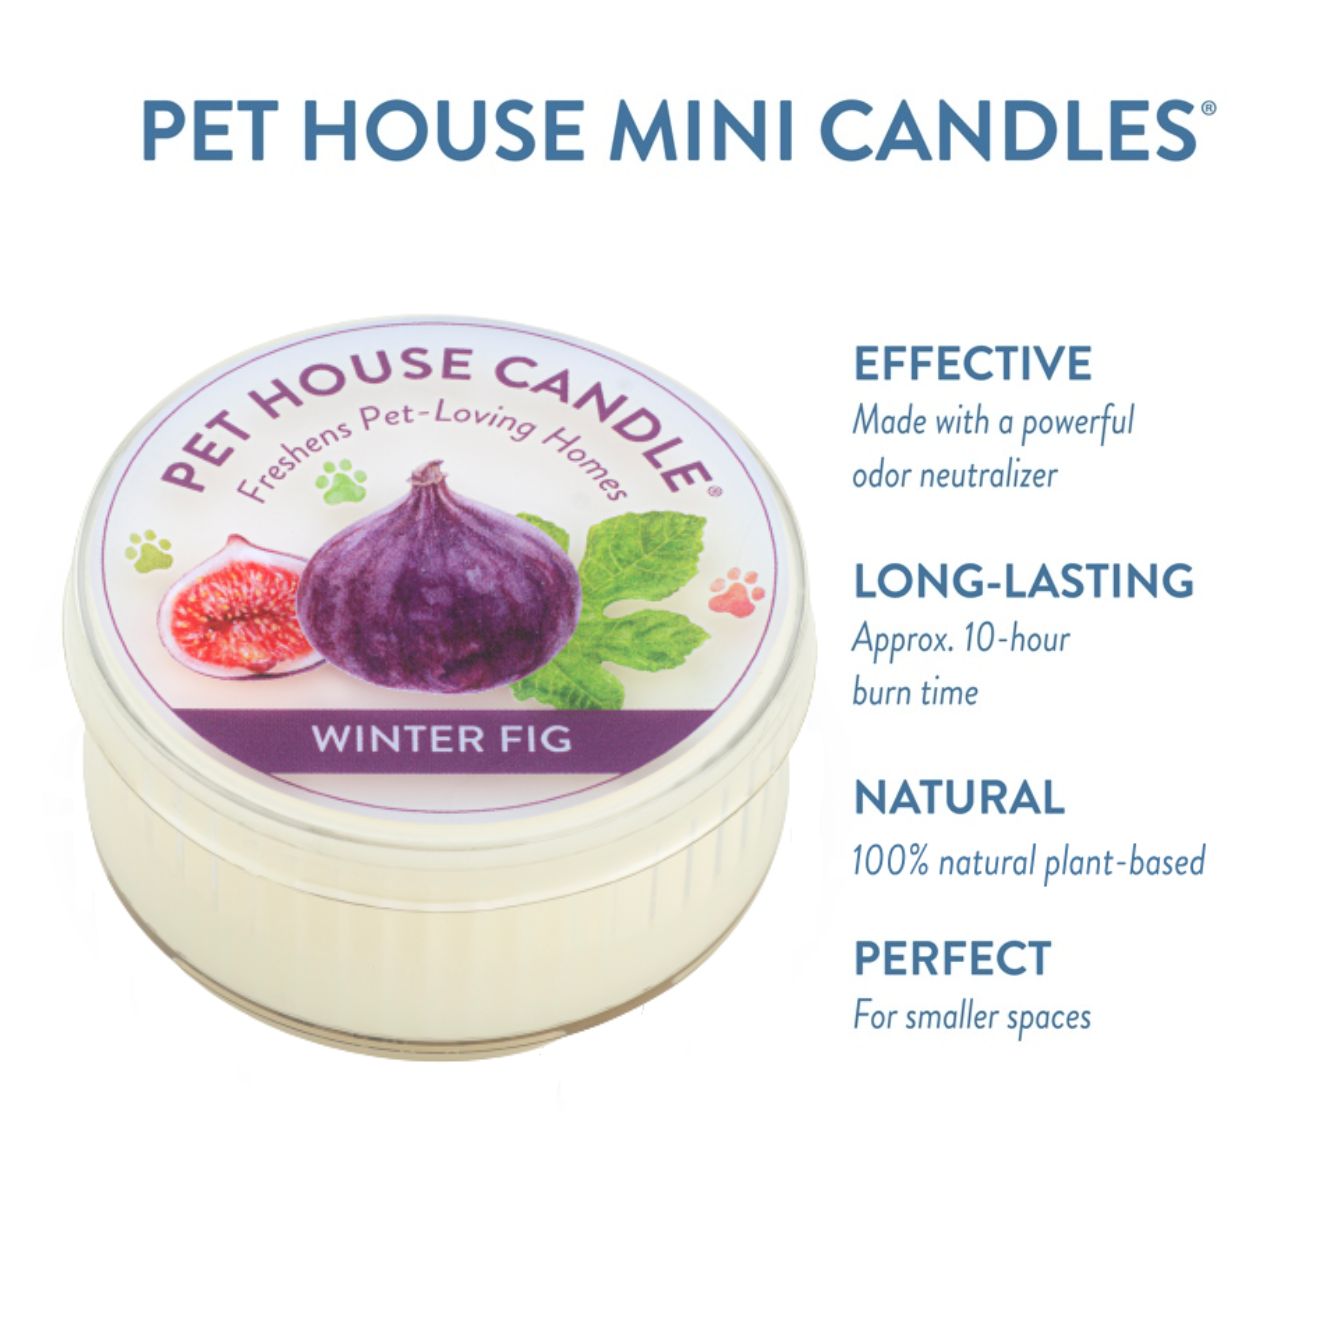 Winter Fig Mini Candle infographics